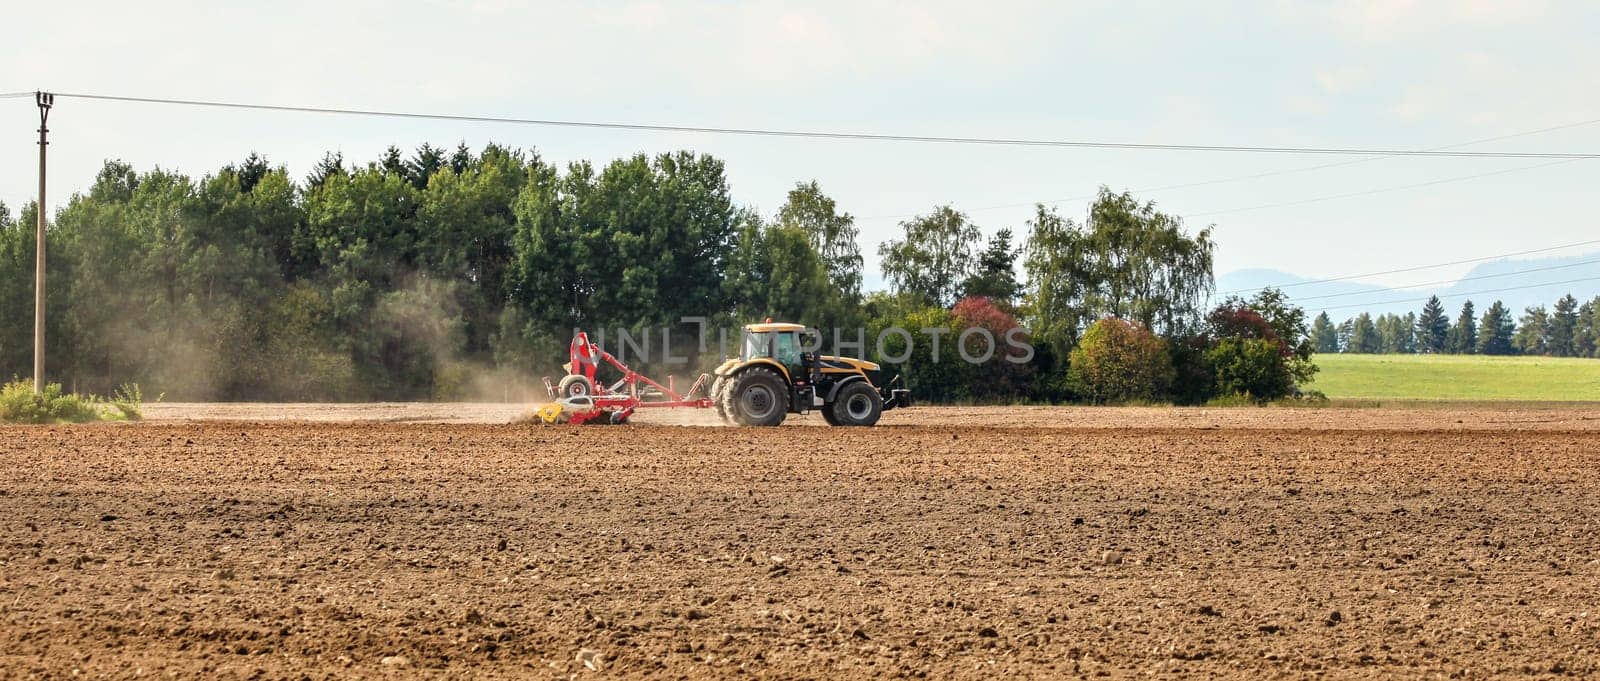 Tractor sowing on empty field, small trees in background. Wide agriculture banner.